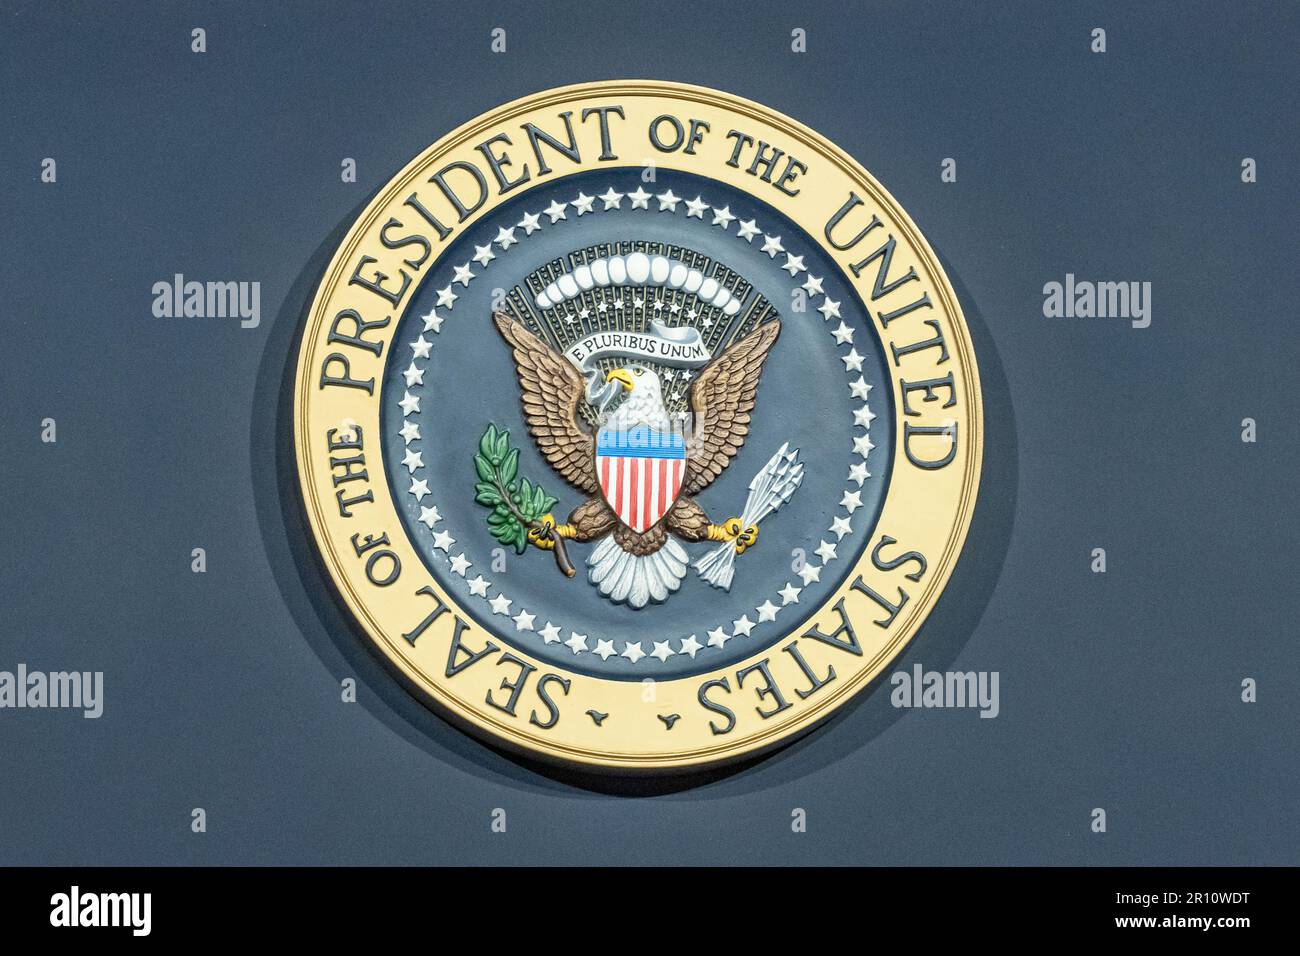 Valhalla, New York, USA. 10th May, 2023. (NEW) President Biden Delivers Remarks On The Debt Ceiling. May 10, 2023, Valhalla, New York, USA: Seal of the President of United States affixed to the podium during an event with US President Joe Biden at SUNY Westchester Community College on May 10, 2023 in Valhalla, New York, USA. U.S. President Joe Biden on Wednesday blasted Republican-demanded spending cuts as &quot;devastating,&quot; making his case in a campaign-style speech to voters as lawmakers met in Washington on raising the government's borrowing limit to avoid a potentially ca Stock Photo